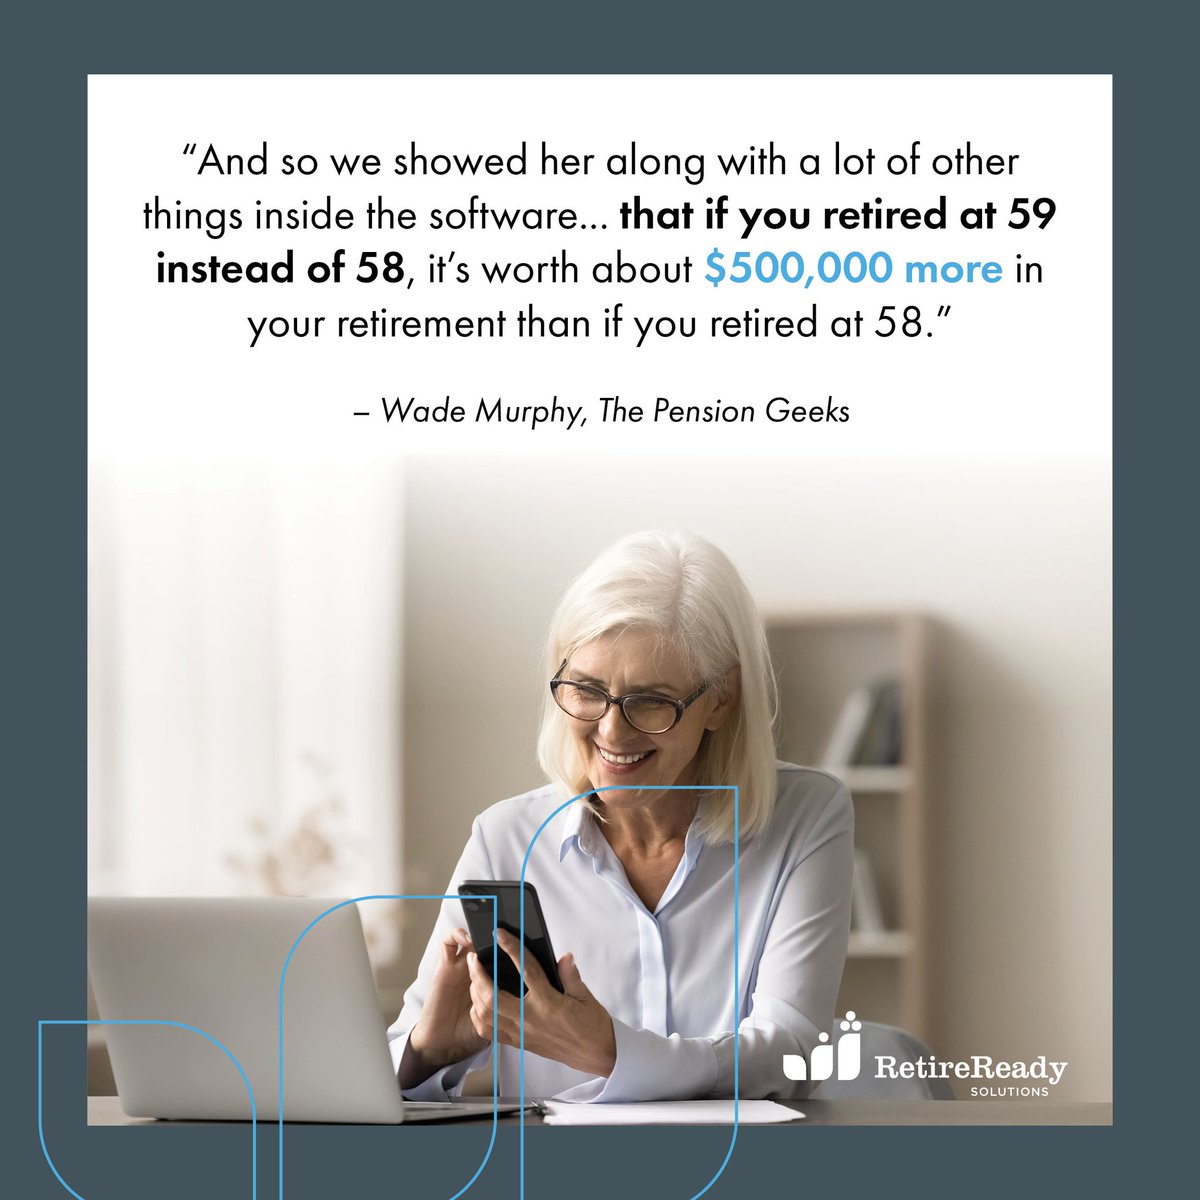 In this exciting new podcast hear how Wade Murphy’s simple mission has impacted how they reach and interact with clients and ultimately grow their business. Listen now! podcast.retireready.com/554275/1421405… #RetireReady #RetirementPlanning #403b #TRAK #TheRetirementAnalysisKit